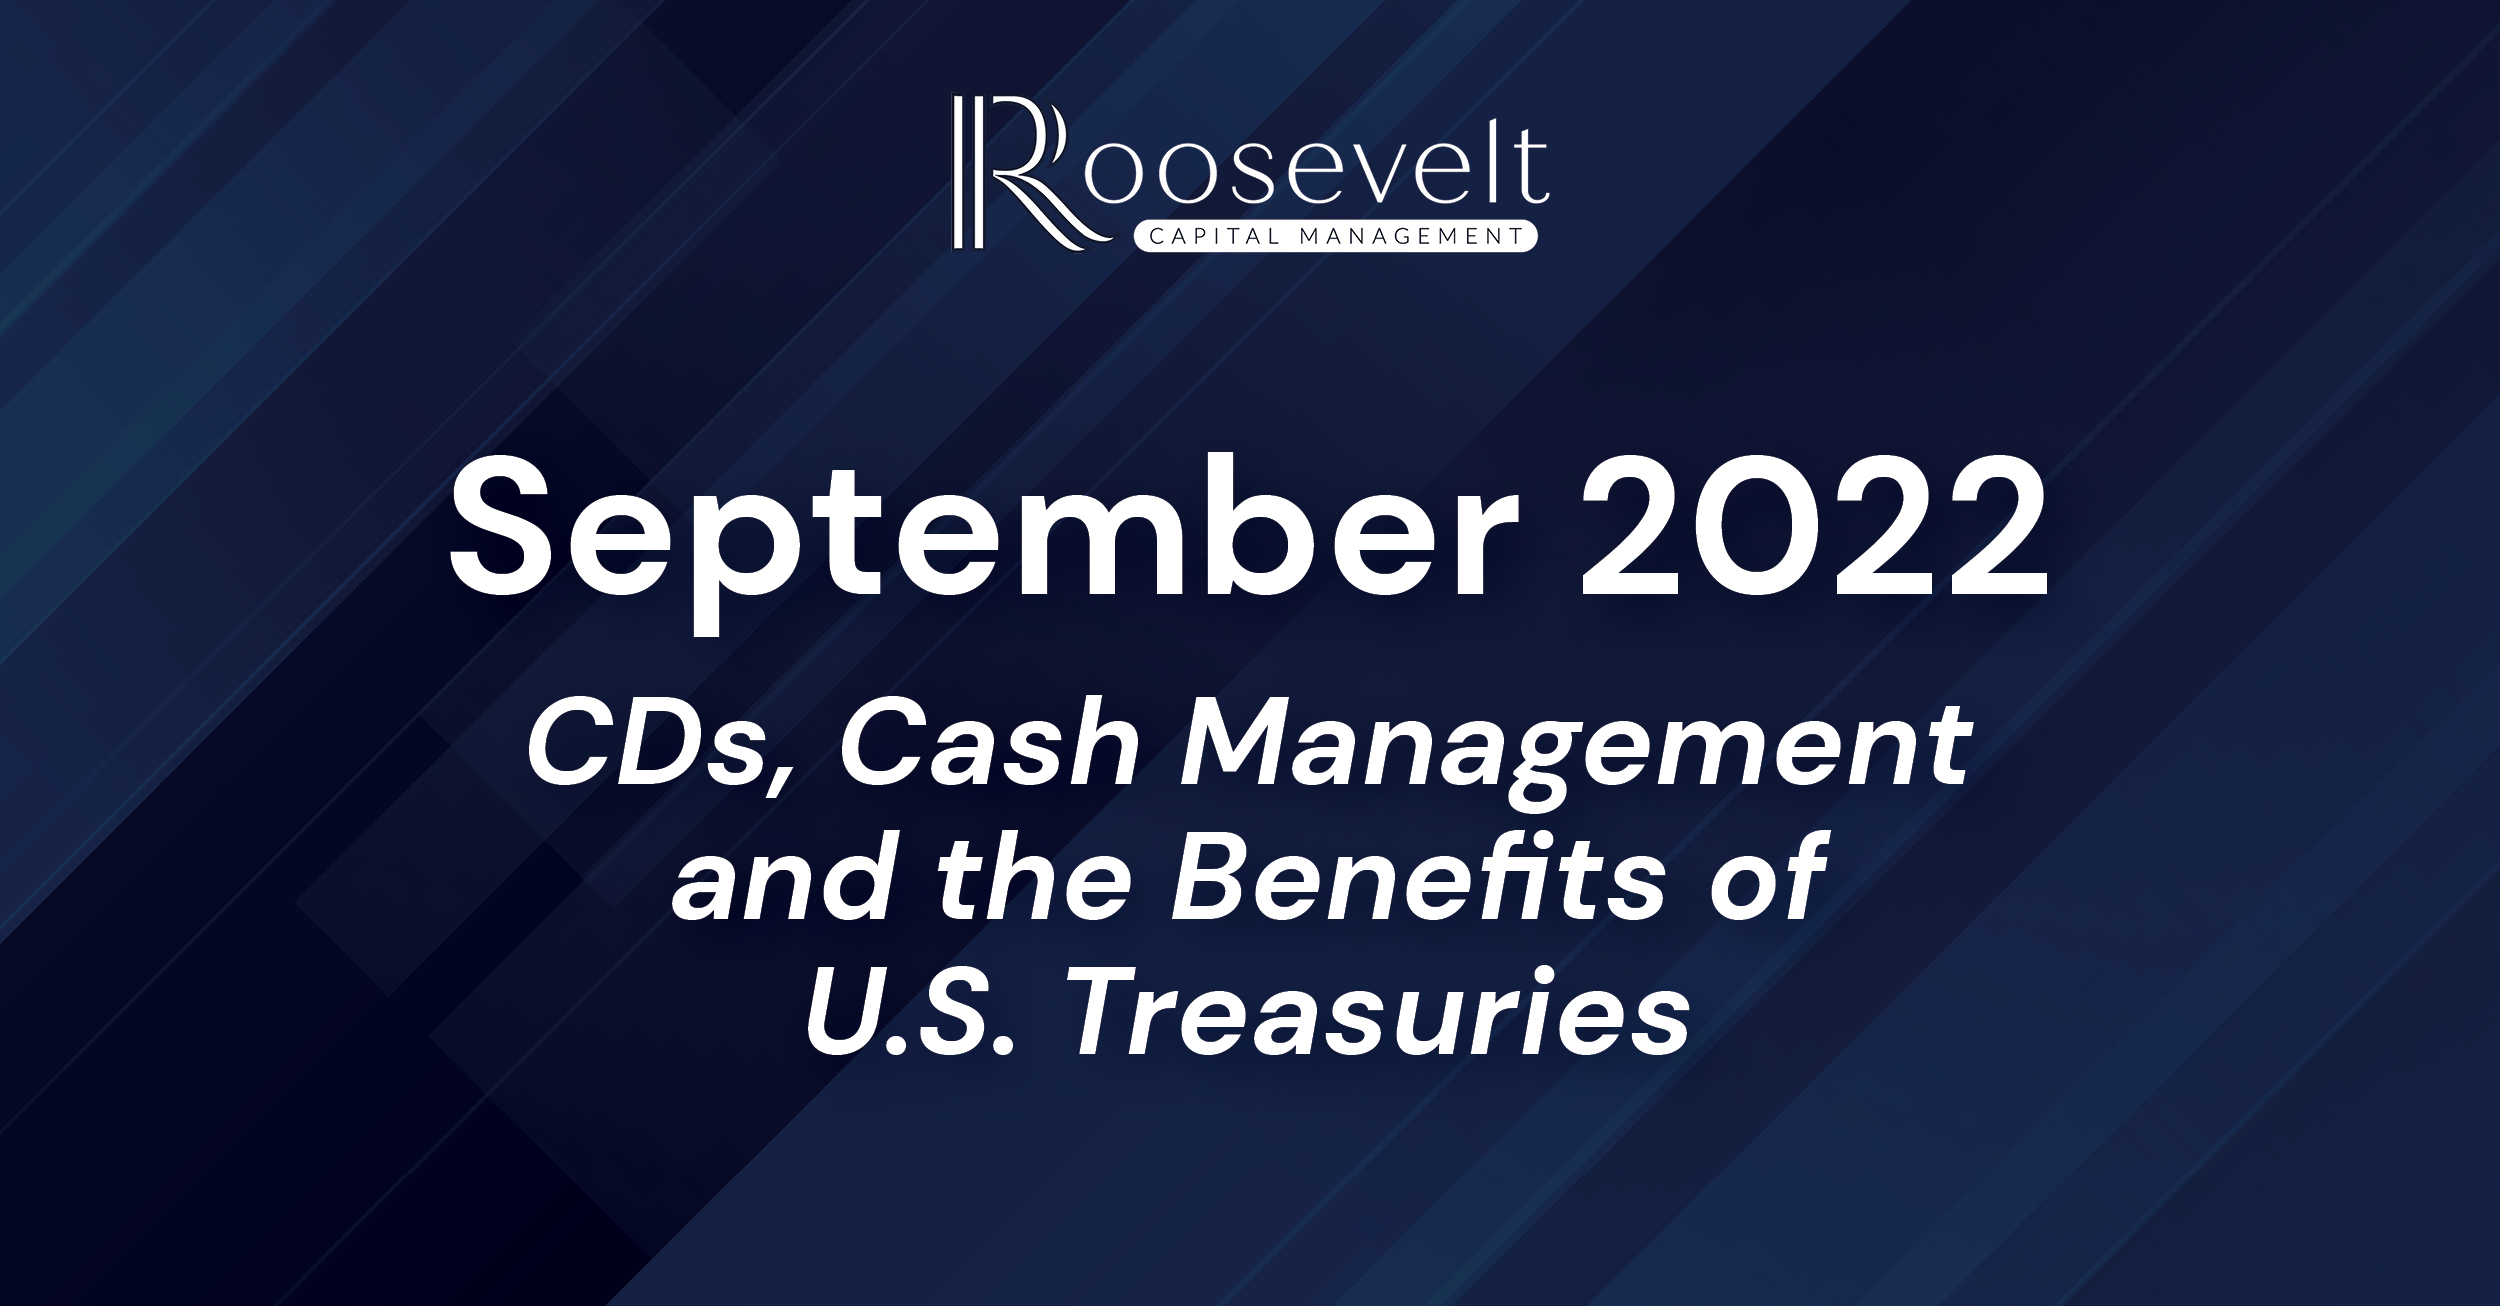 September 2022 - CDs, Cash Management and the Benefits of U.S. Treasuries